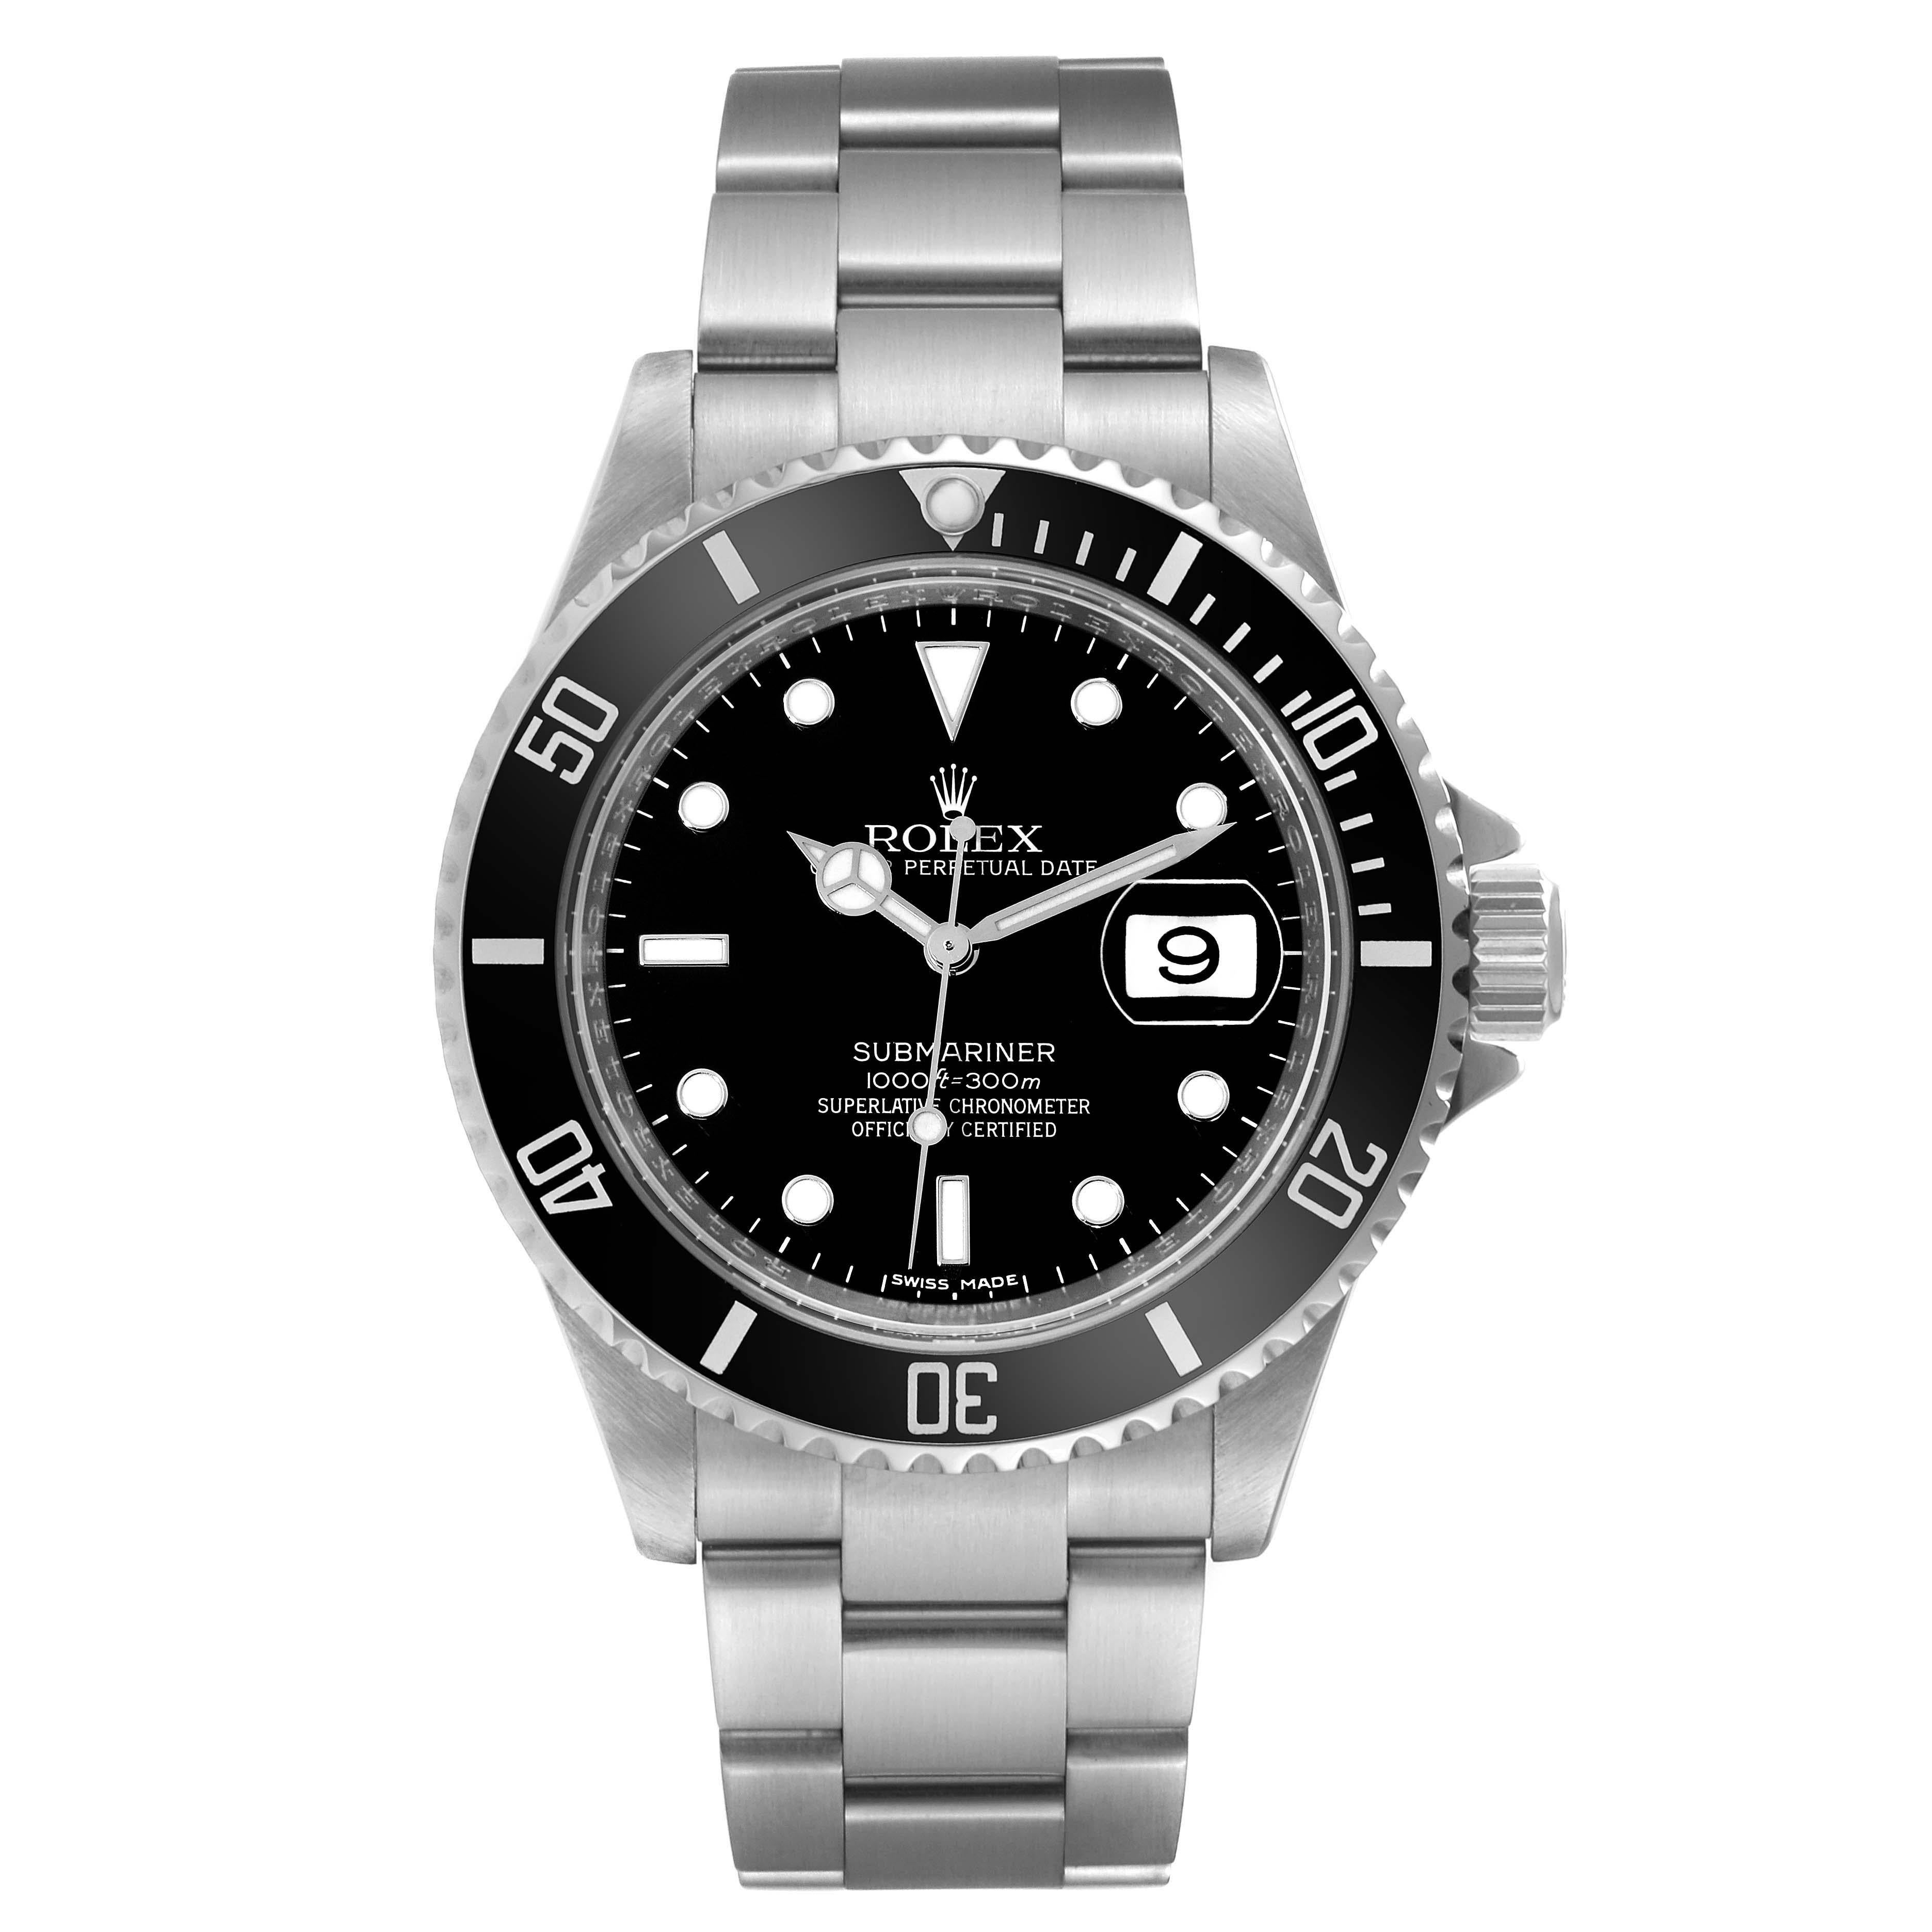 Rolex Submariner Date Black Dial Steel Mens Watch 16610 Box Card In Excellent Condition For Sale In Atlanta, GA